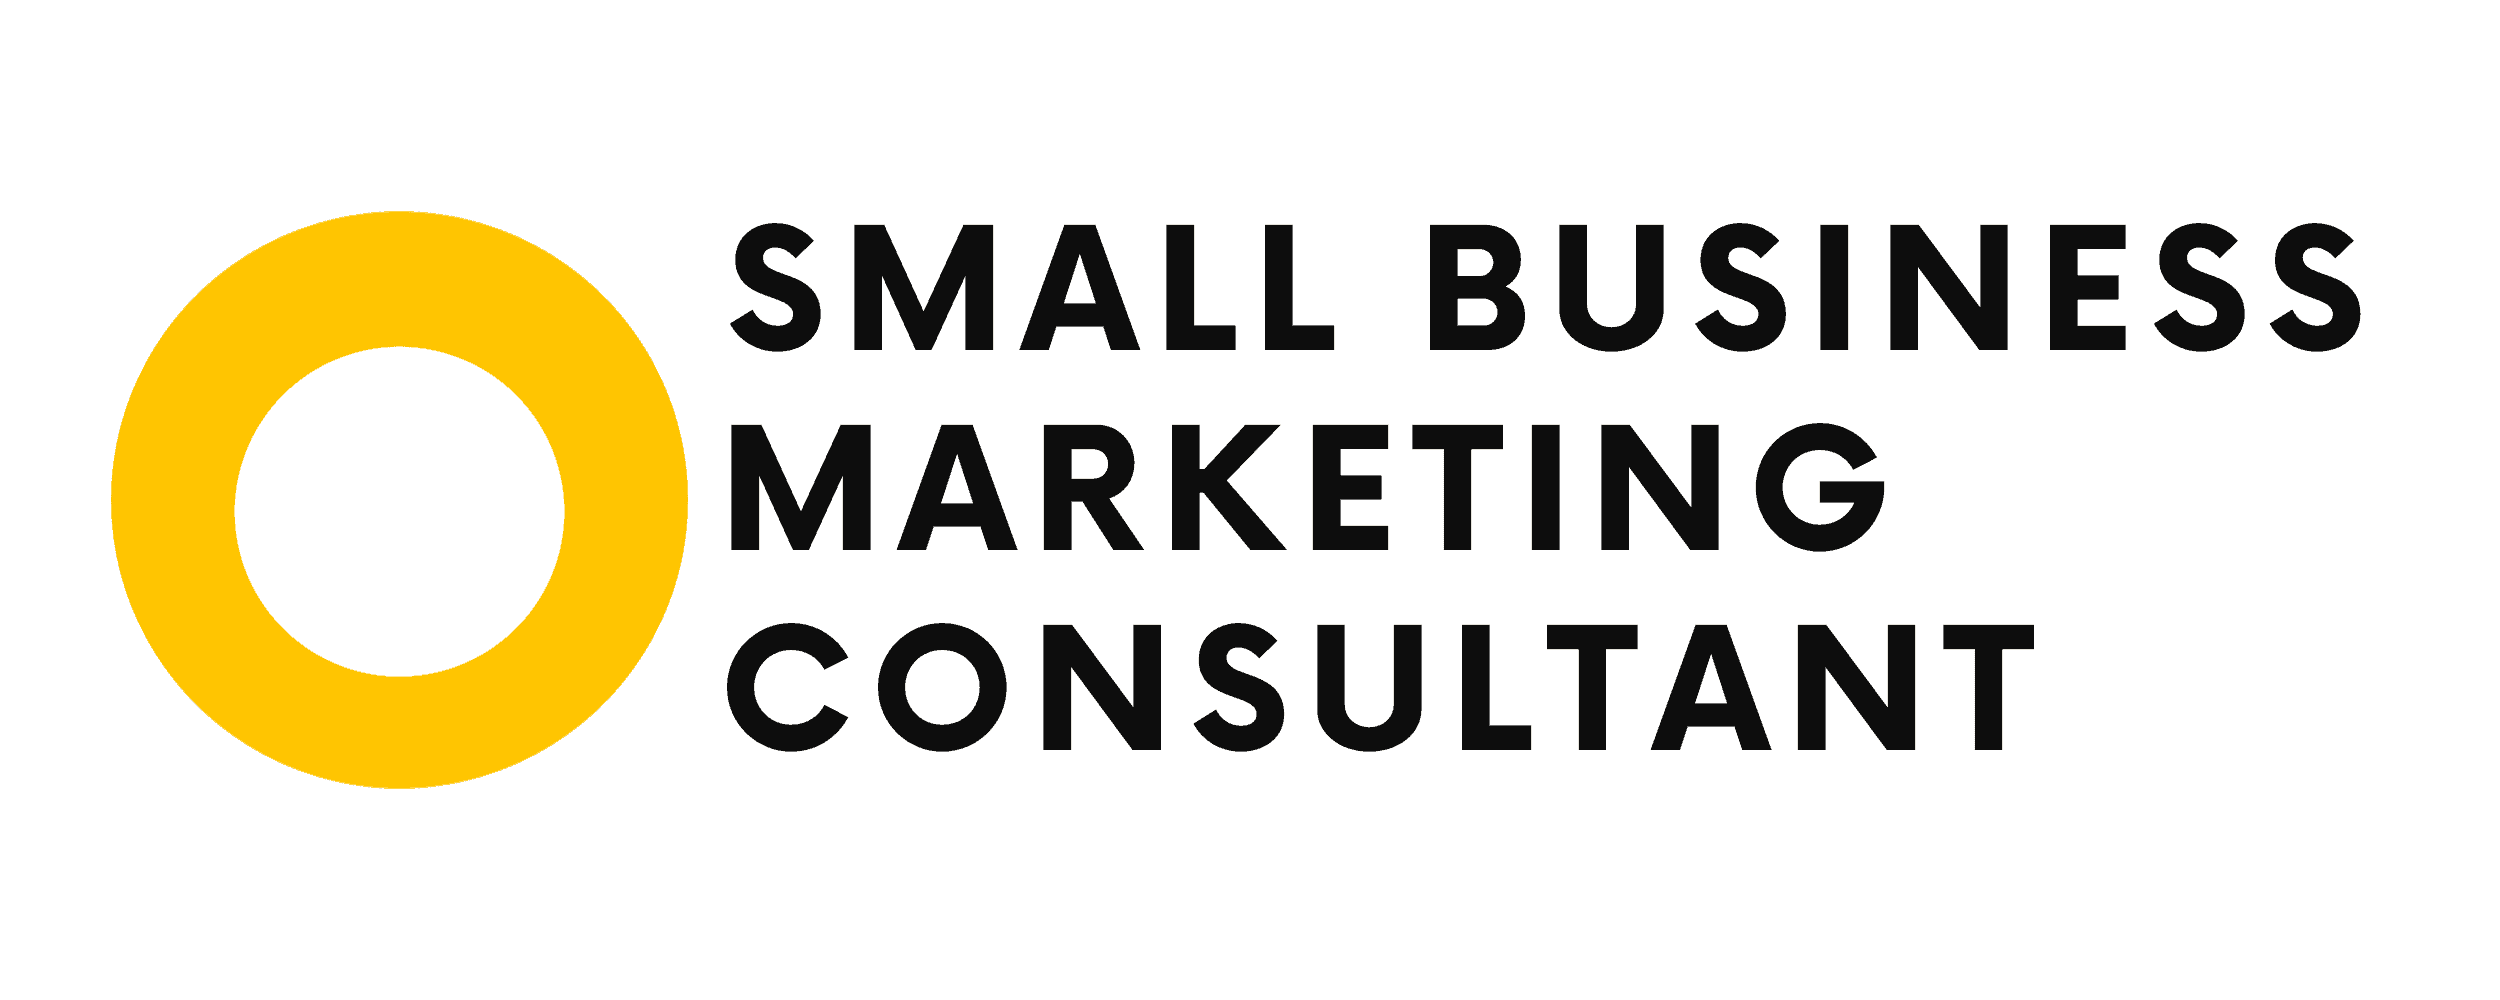 Small Business Marketing Consultant business logo